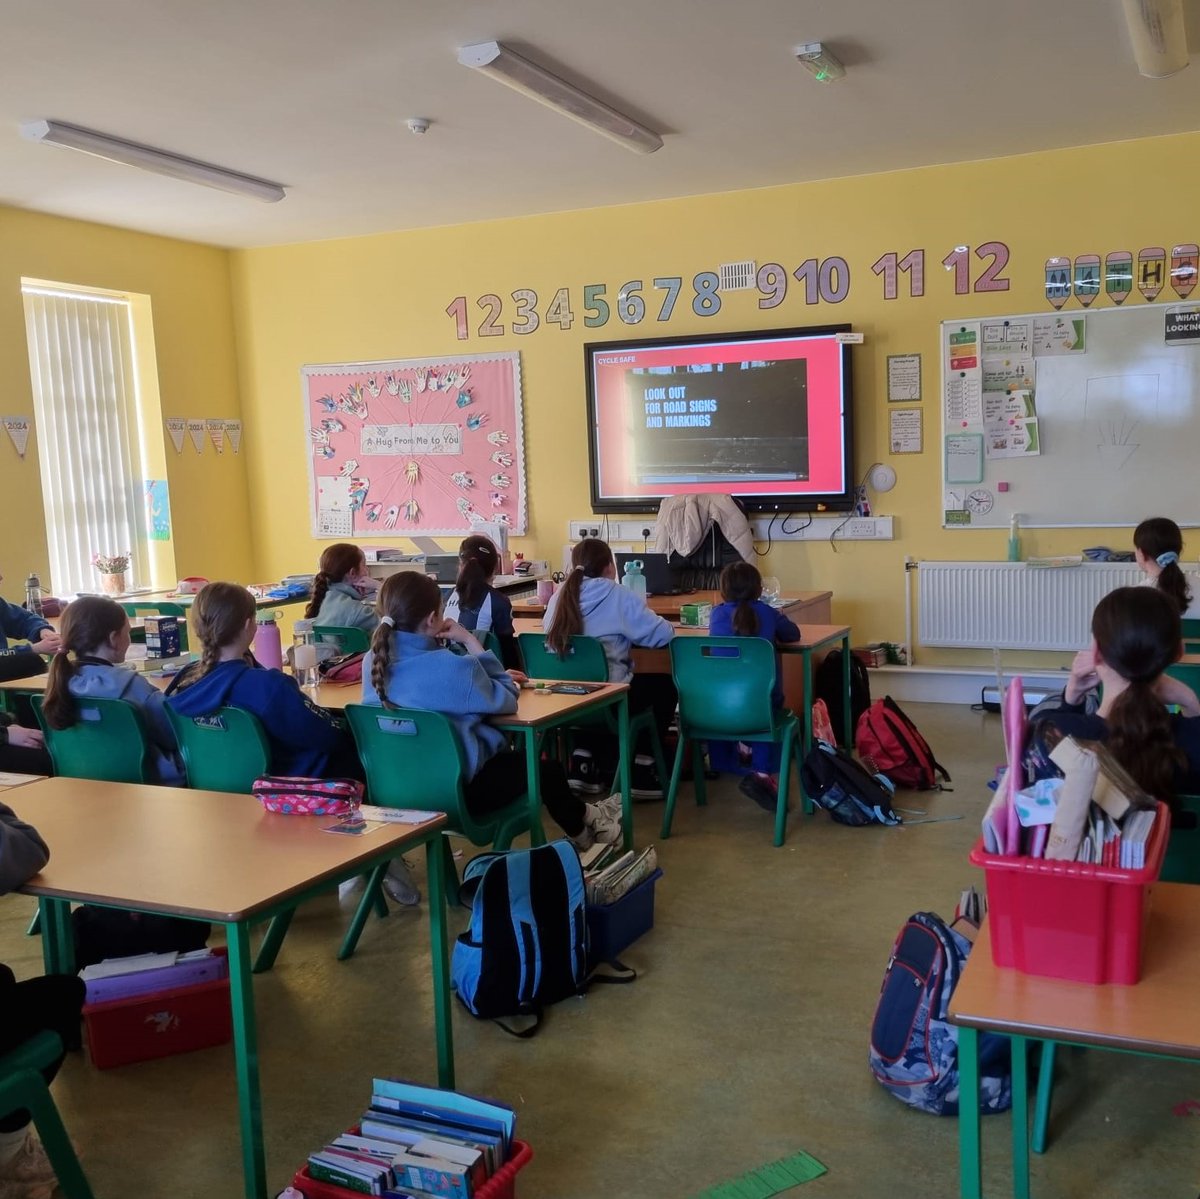 🚲💡 Road Safety Matters! Students at St Mary's NS Stokestown, Roscommon understand the importance of road safety after their recent road safety talk. Want your school to learn too? Our educators offer FREE visits! Email educationservice@rsa.ie to book. #VisionZero